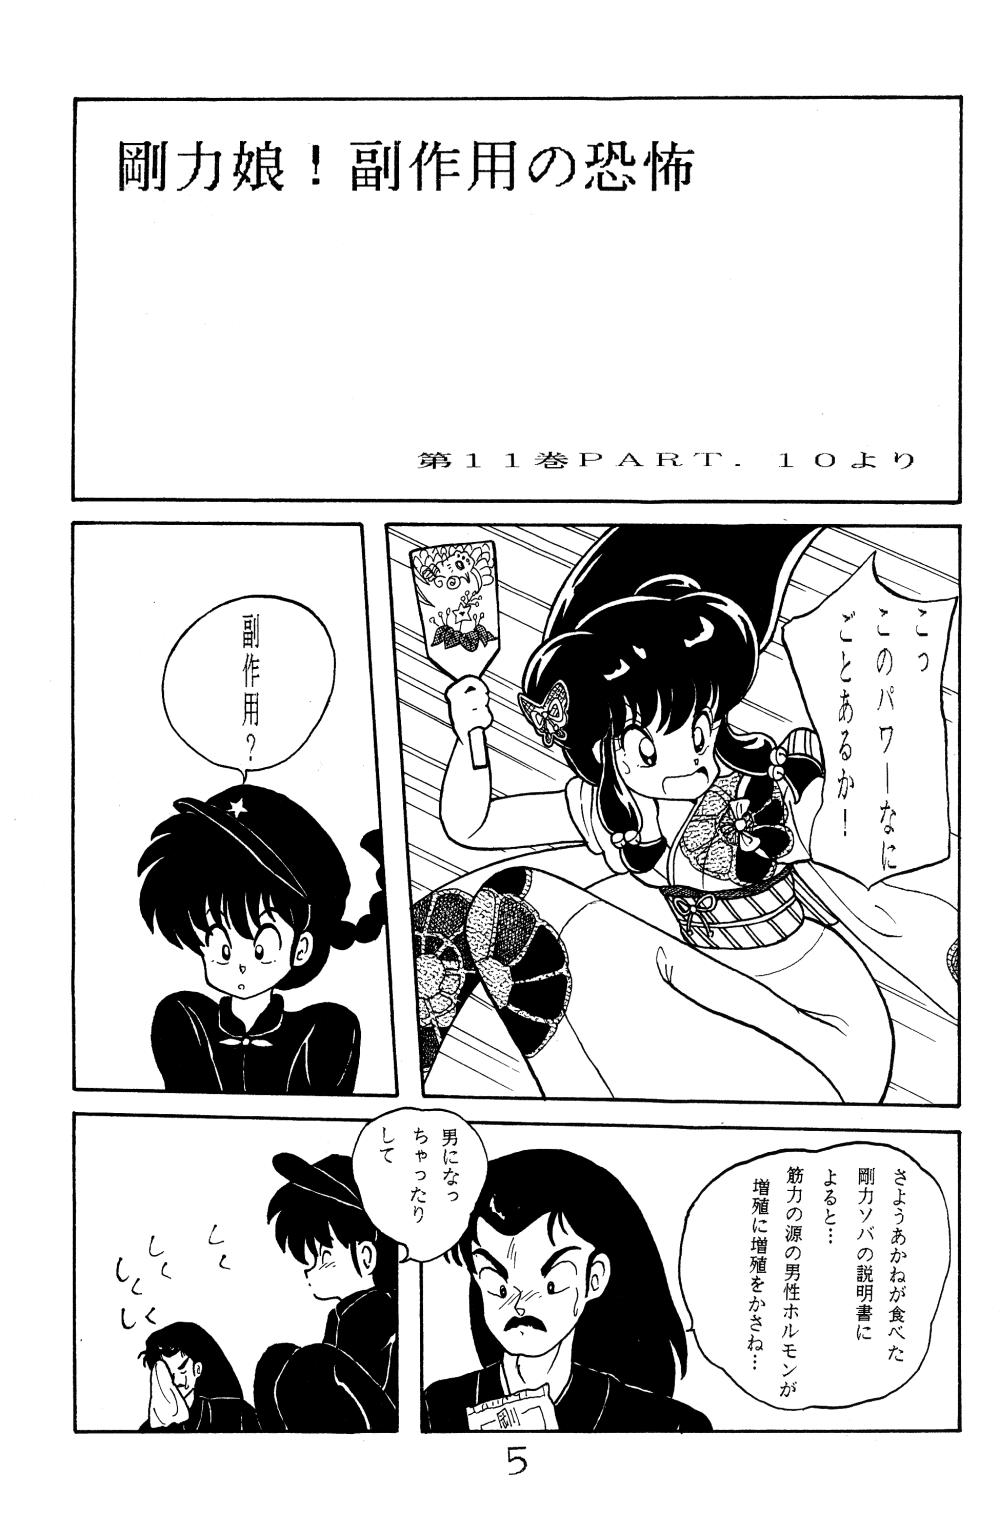 NOTORIOUS Ranma 1/2 Special 4